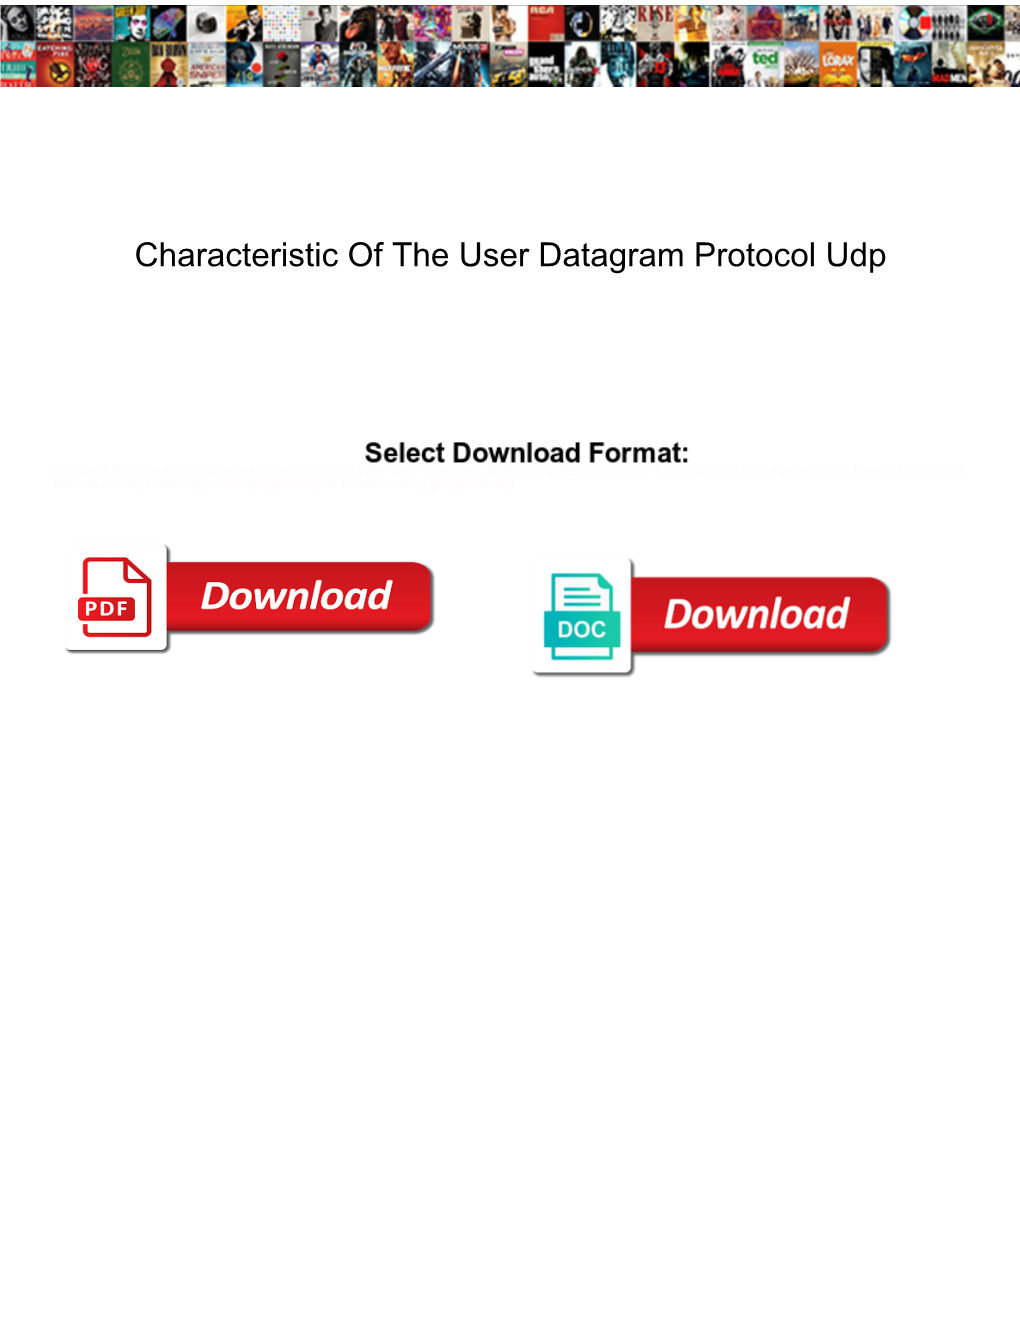 Characteristic of the User Datagram Protocol Udp